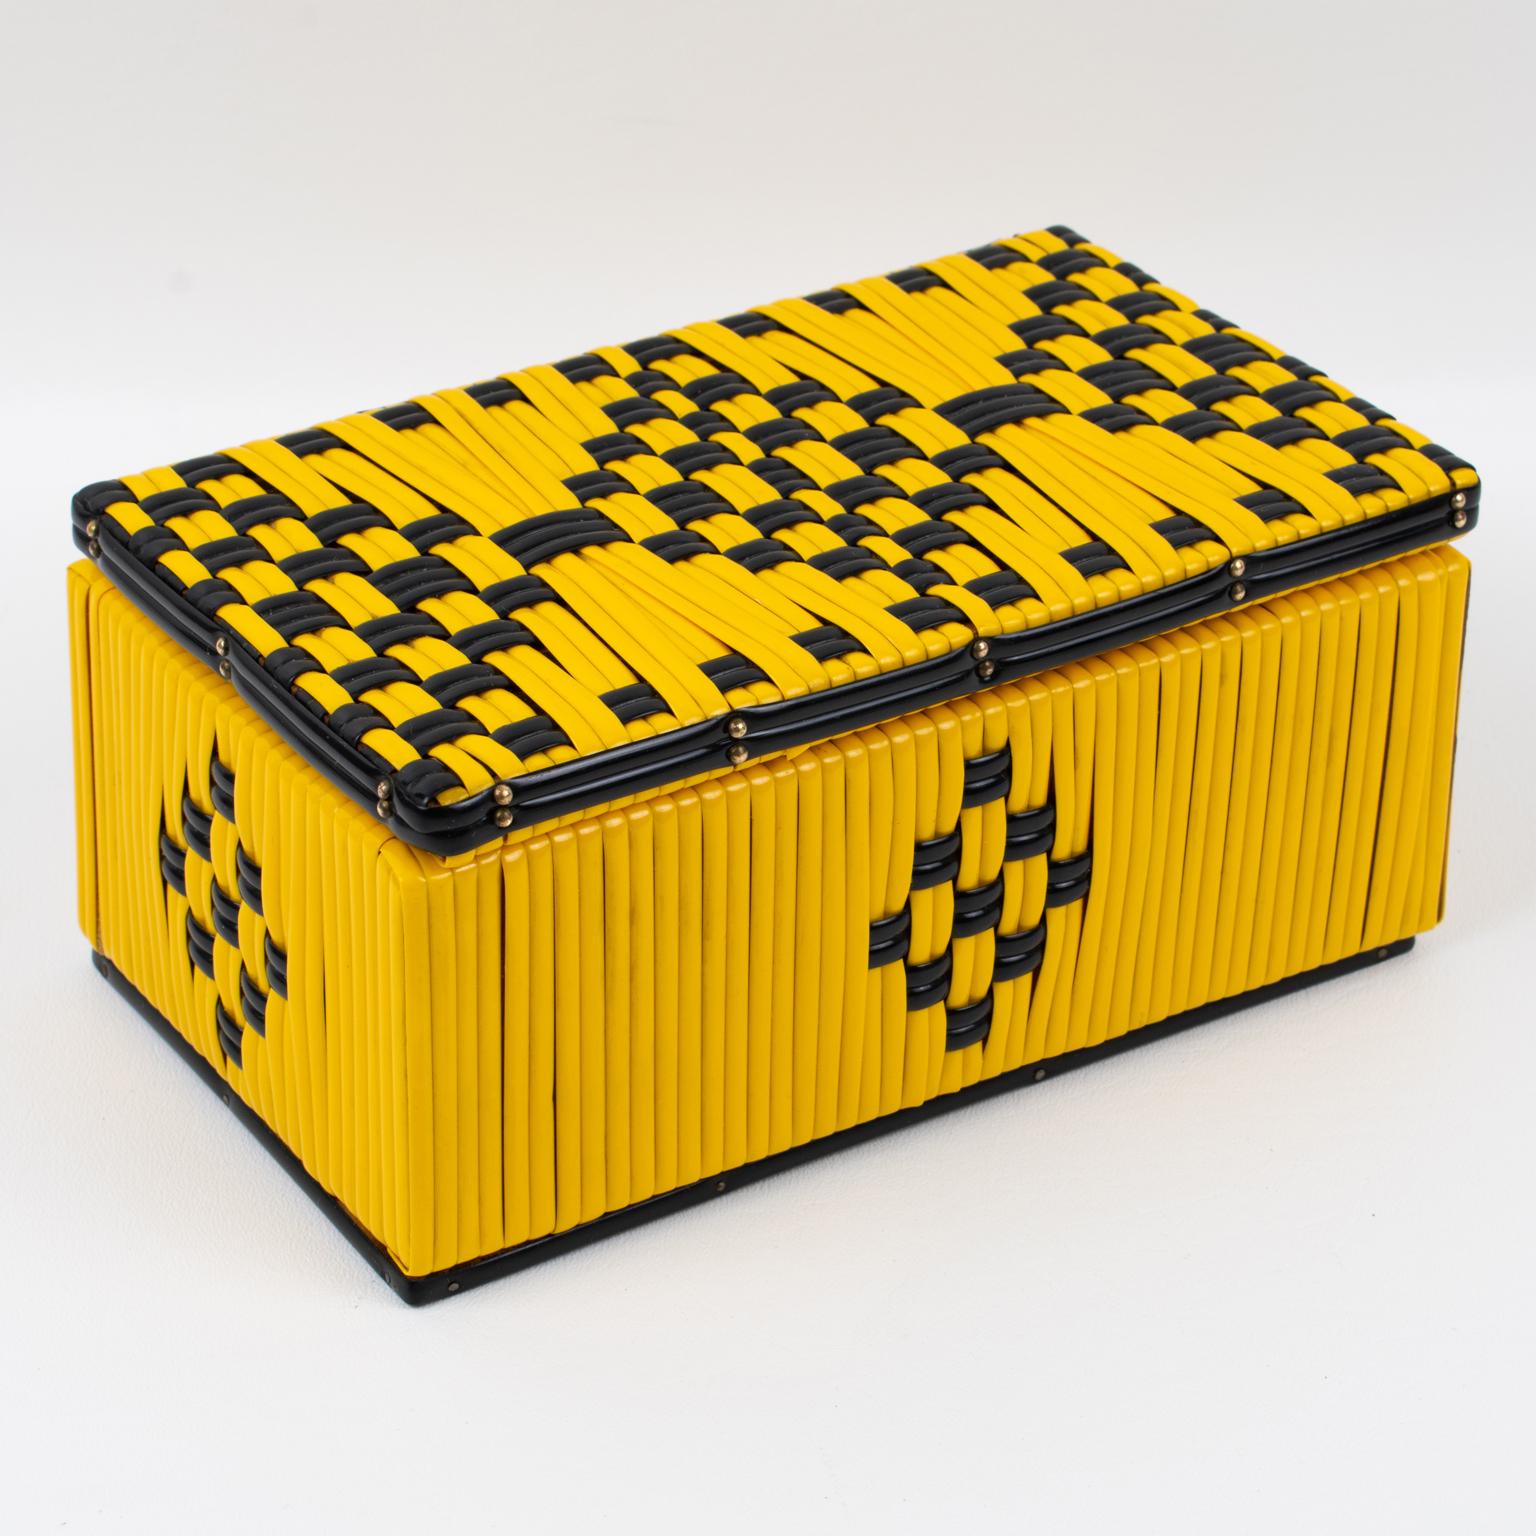 This lovely 1950s French decorative lidded box features a bright yellow vinyl plastic scooby or craft lace (in French scoubidou) with black contrast thread with a stunning geometric design on all faces. There is no visible maker's mark.
Good